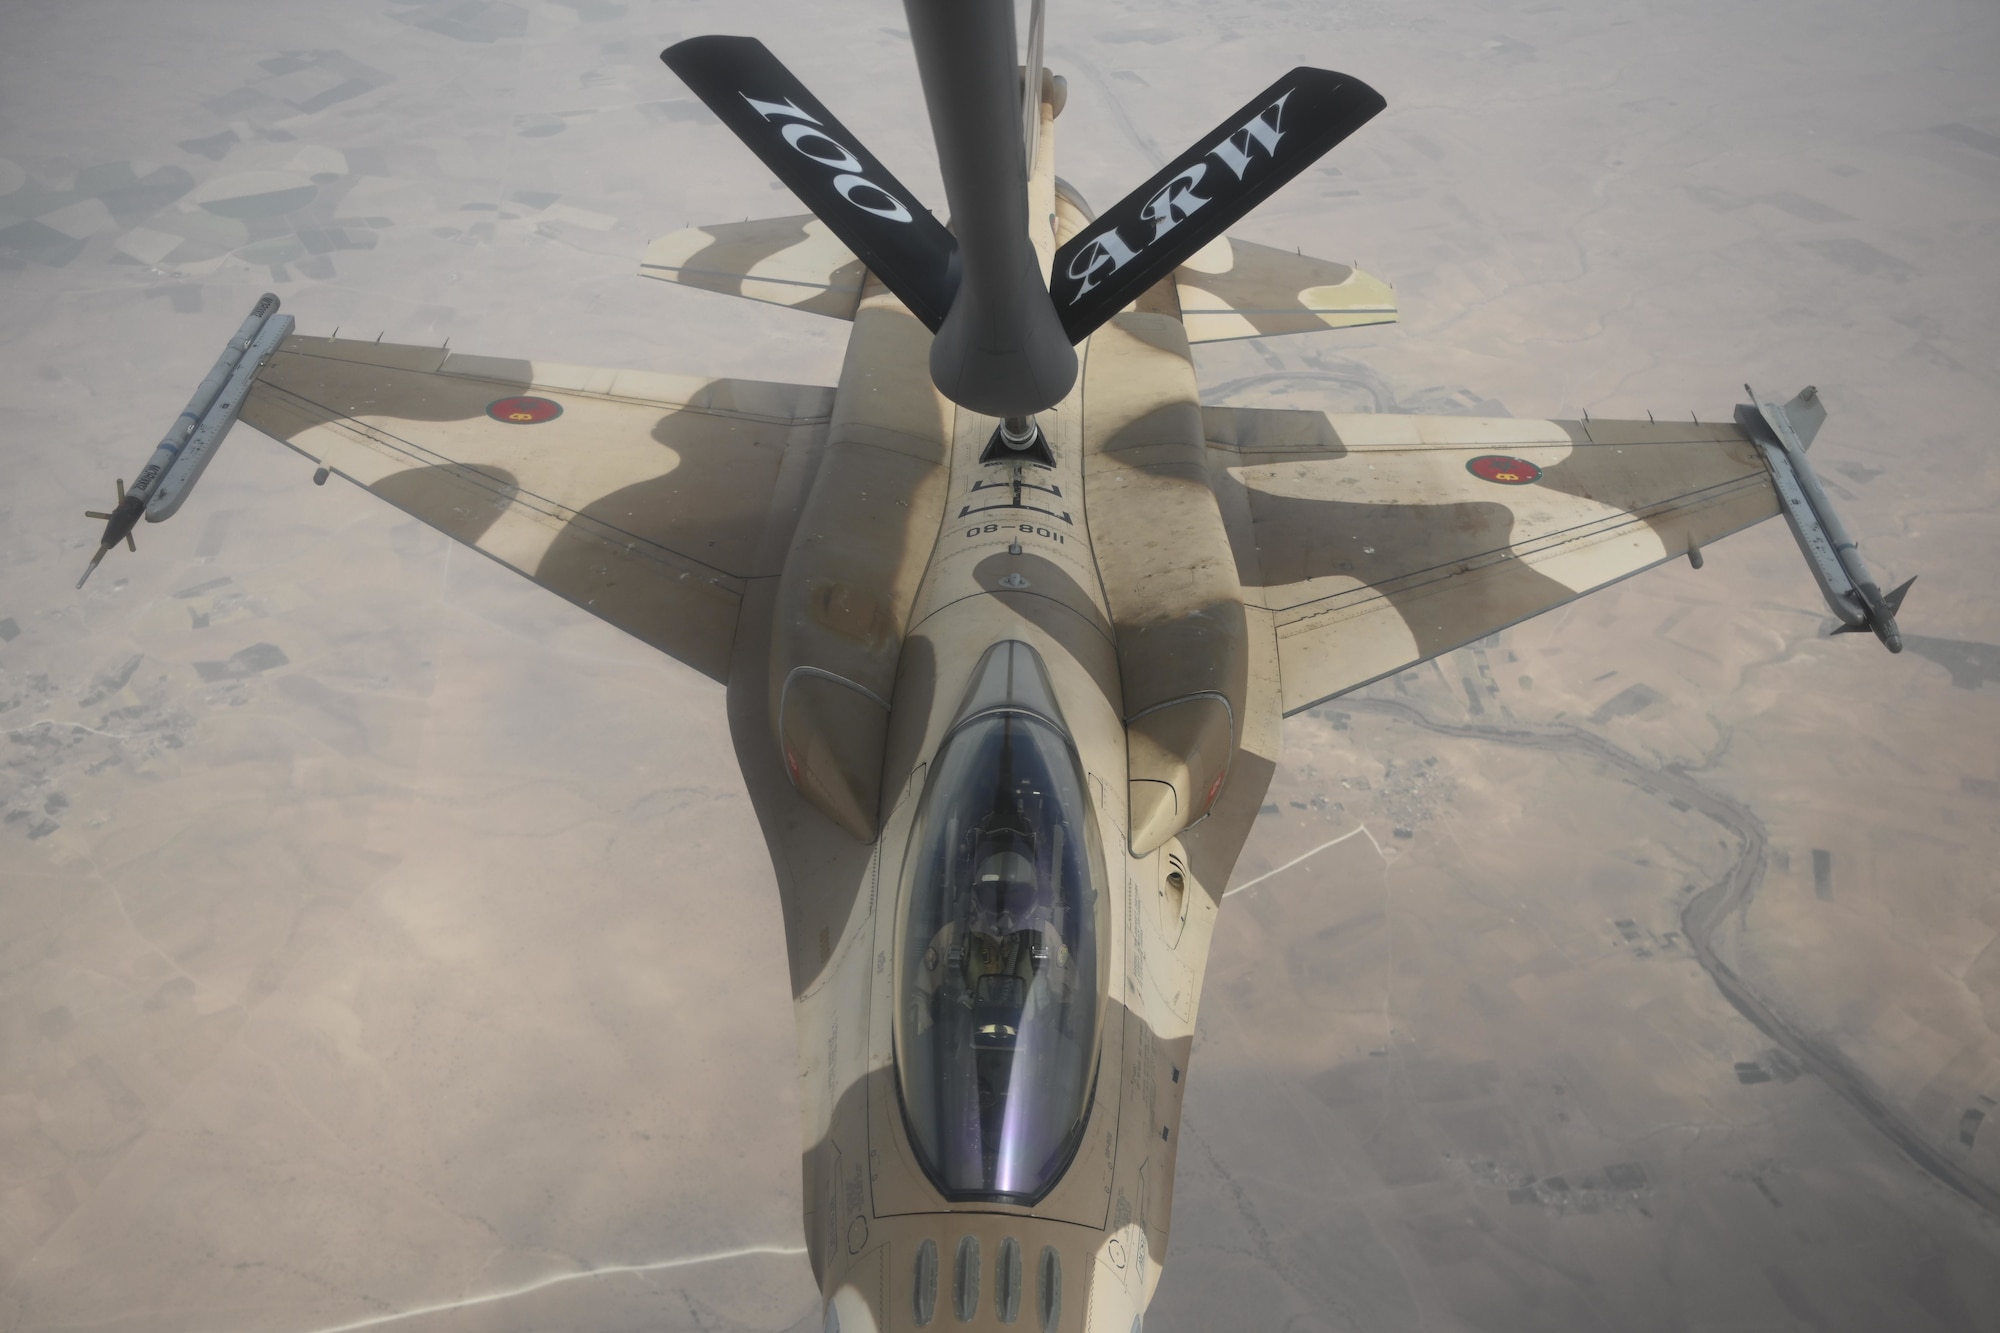 A Royal Moroccan Air Force F-16 Fighting Falcon refuels with a U.S. Air Force KC-135 Stratotanker over Morocco during exercise African Lion 2021, June 15, 2021. African Lion is U.S. Africa Command's largest, premier, joint, annual exercise hosted by Morocco, Tunisia and Senegal. More than 7,000 participants from nine nations and NATO train together with a focus on enhancing readiness for U.S. and partner nation forces. (U.S. Air Force photo by Senior Airman Joseph Barron)